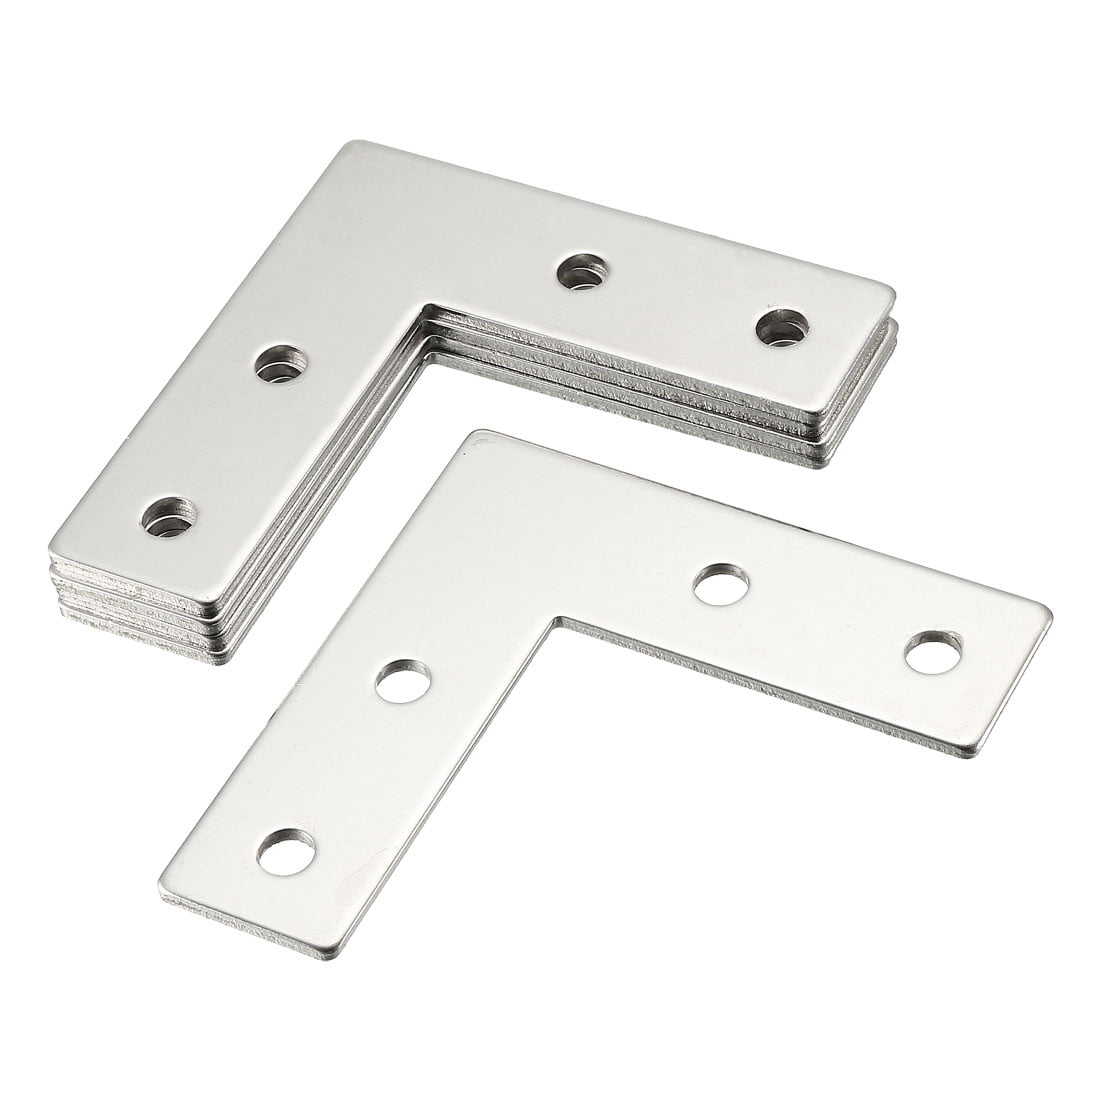 Uxcell Steel Flat Angle Bracket Plate L Shape Repair Joining Support ...